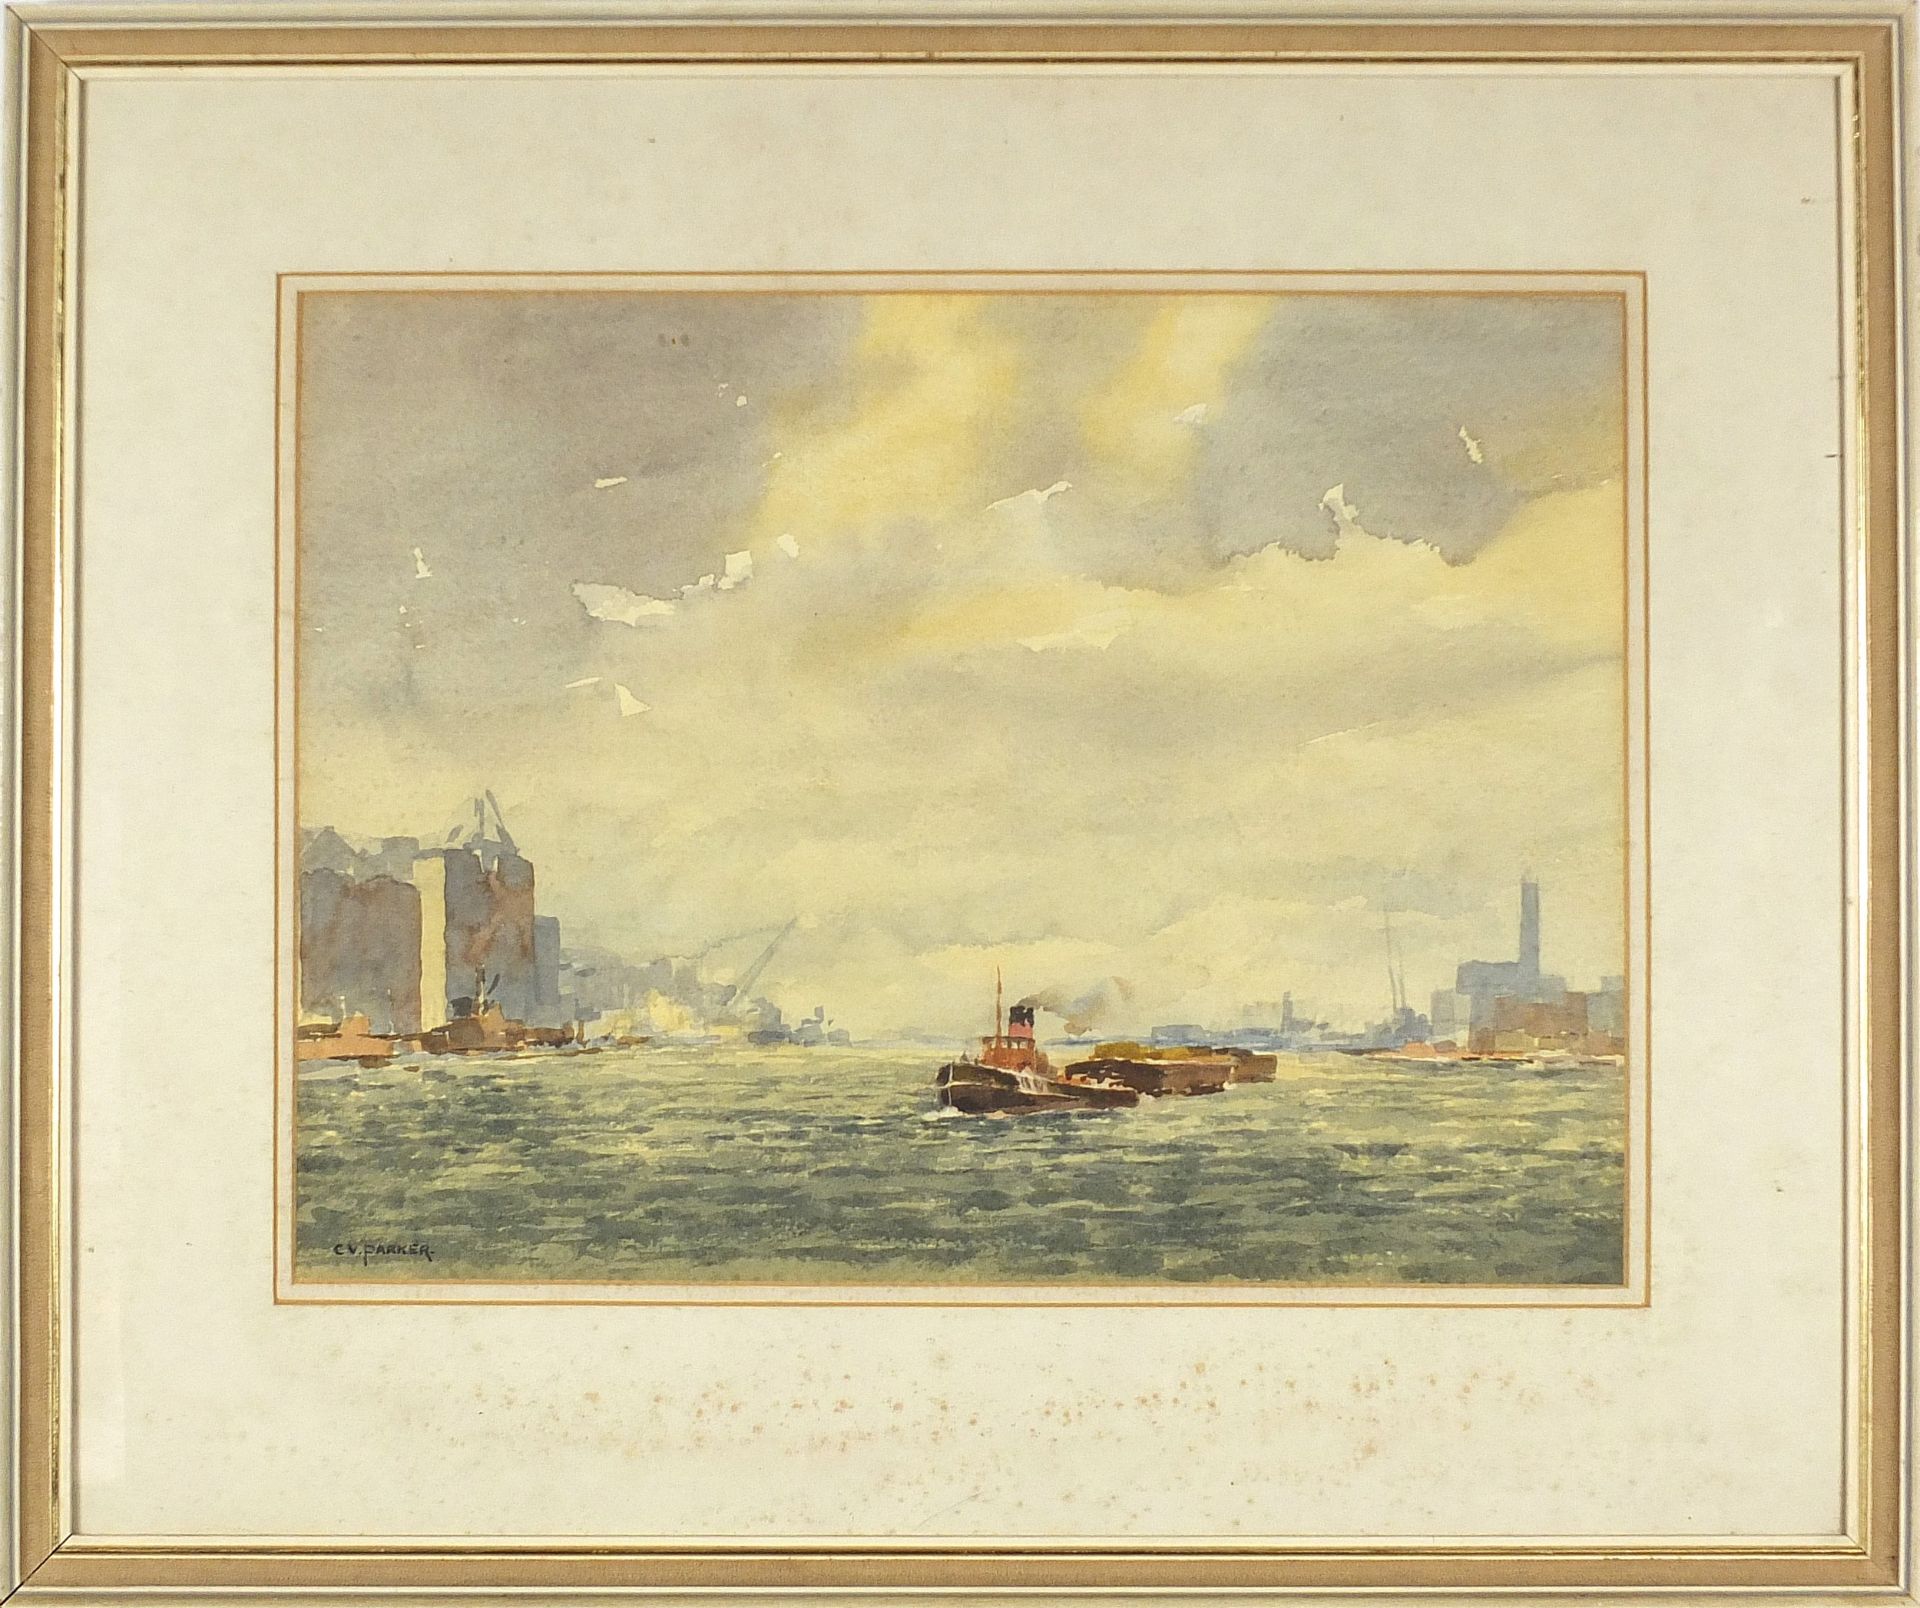 C V Parker - Off Rotherhithe, watercolour, The Wapping Group of Artists label verso, mounted, framed - Image 2 of 3